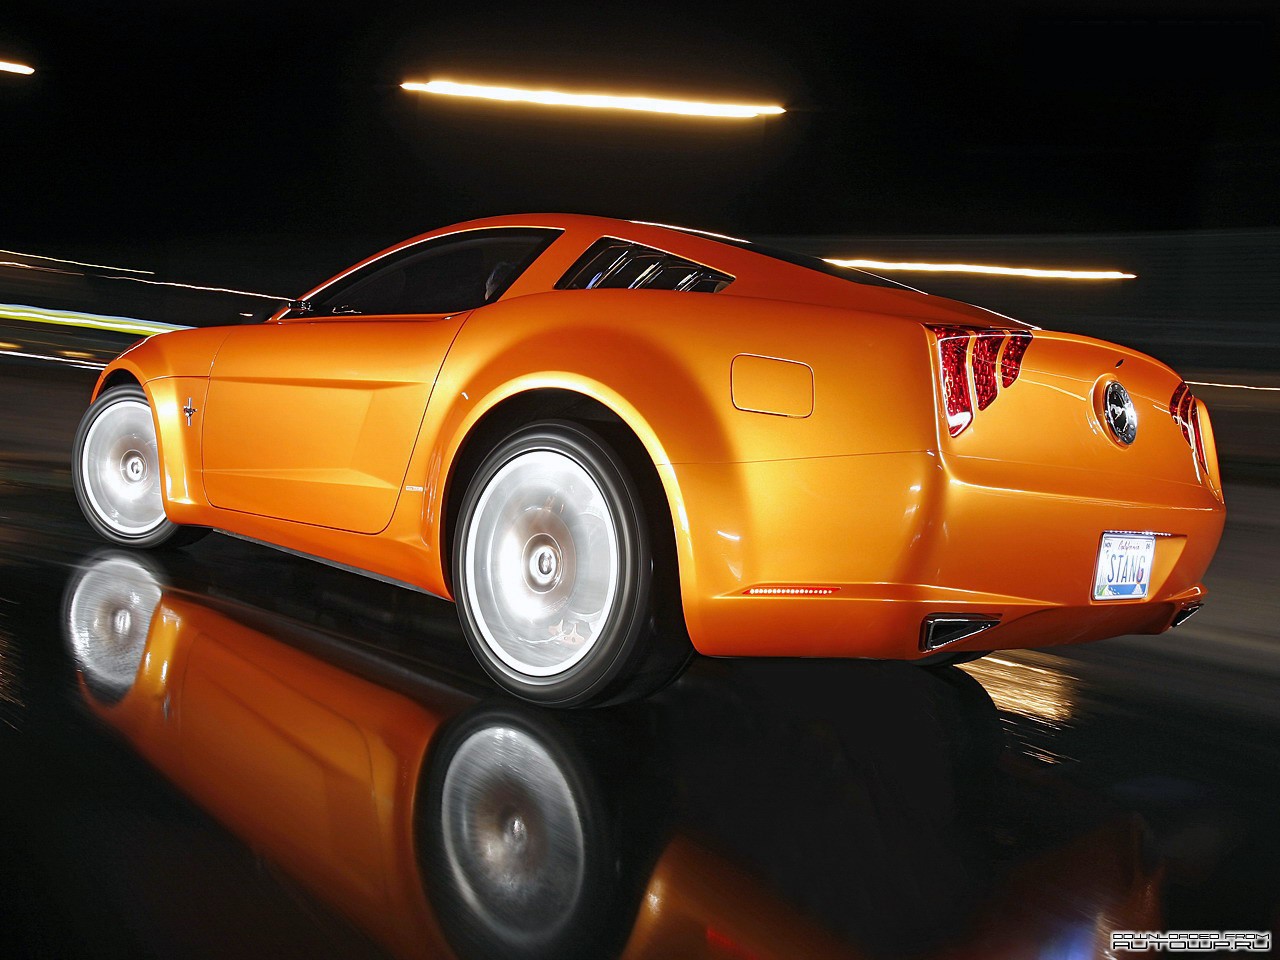 General 1280x960 car orange cars vehicle Ford reflection Mustang by Giugiaro Ford Mustang muscle cars American cars concept cars